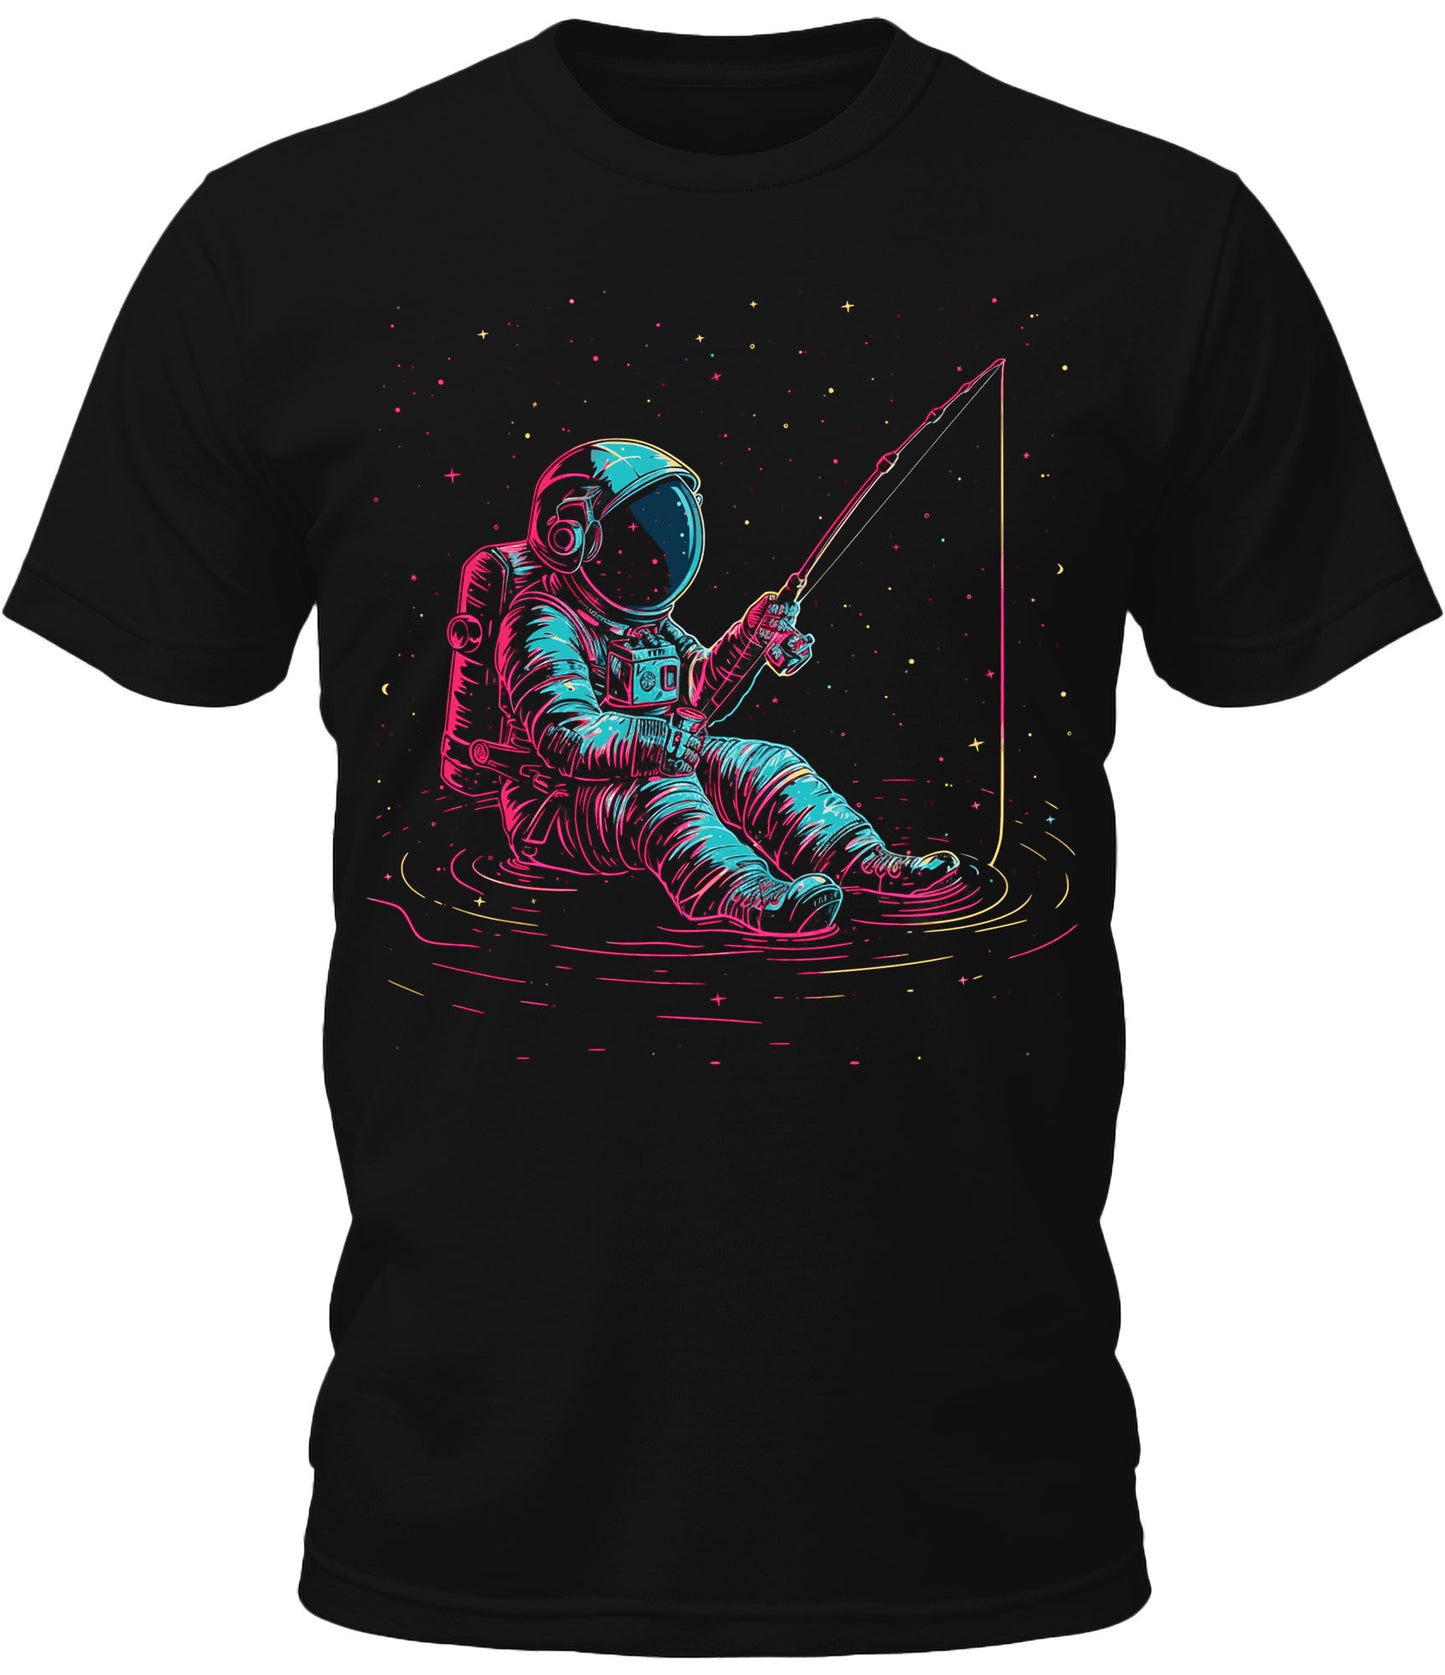 Mens Astronaut Space Fishing Graphic Tee